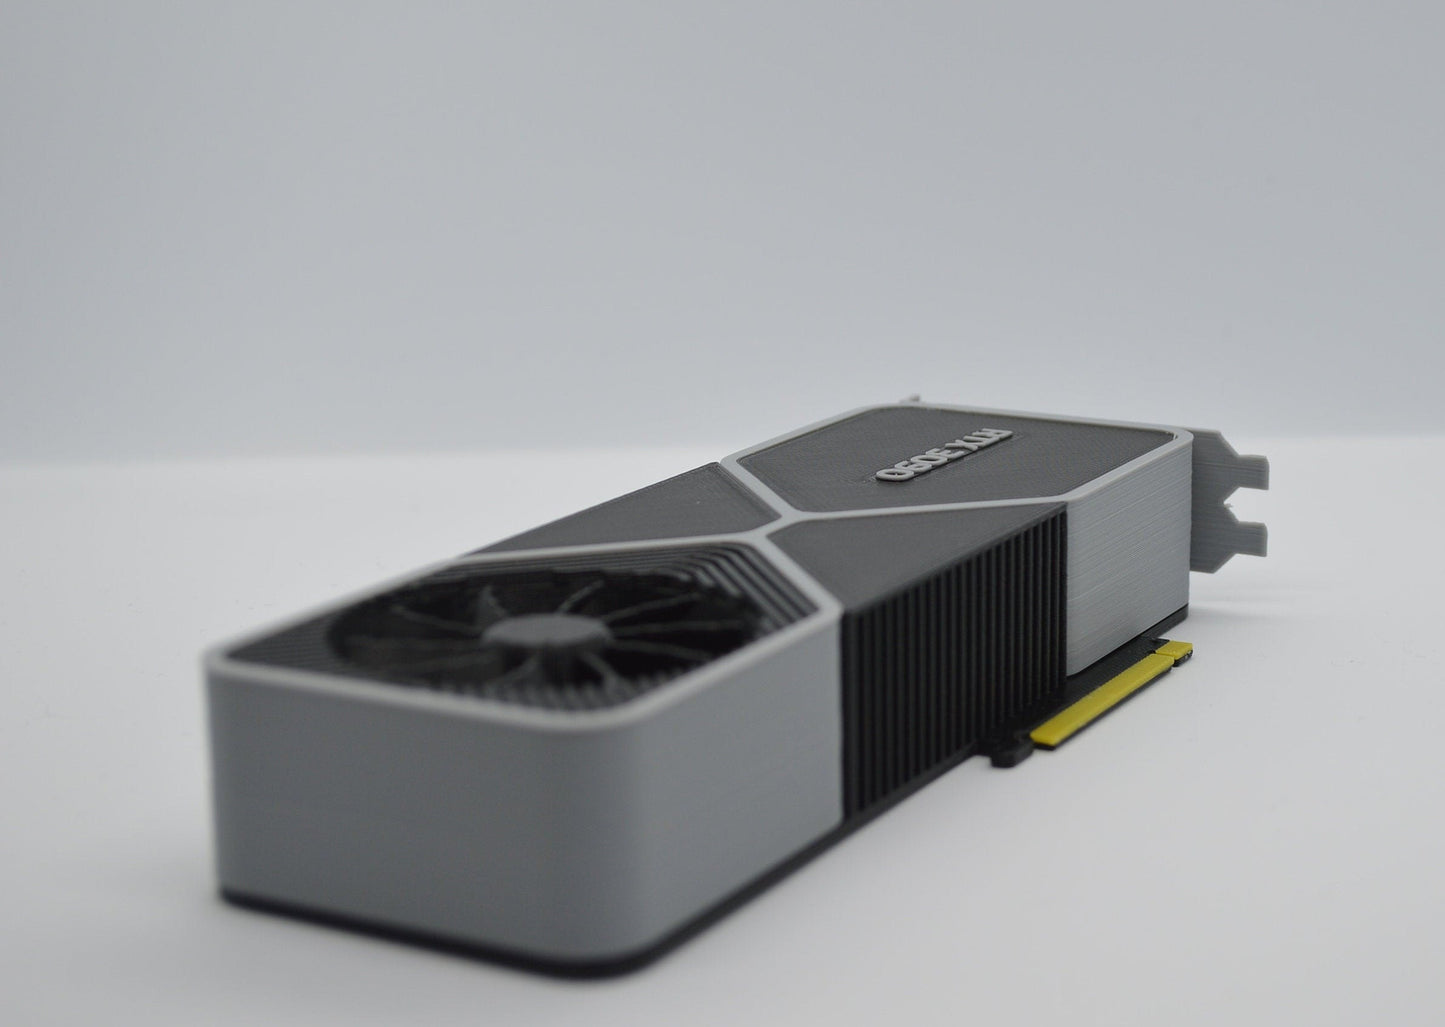 Founders Edition RTX 3090 3D Printed Video Card Model